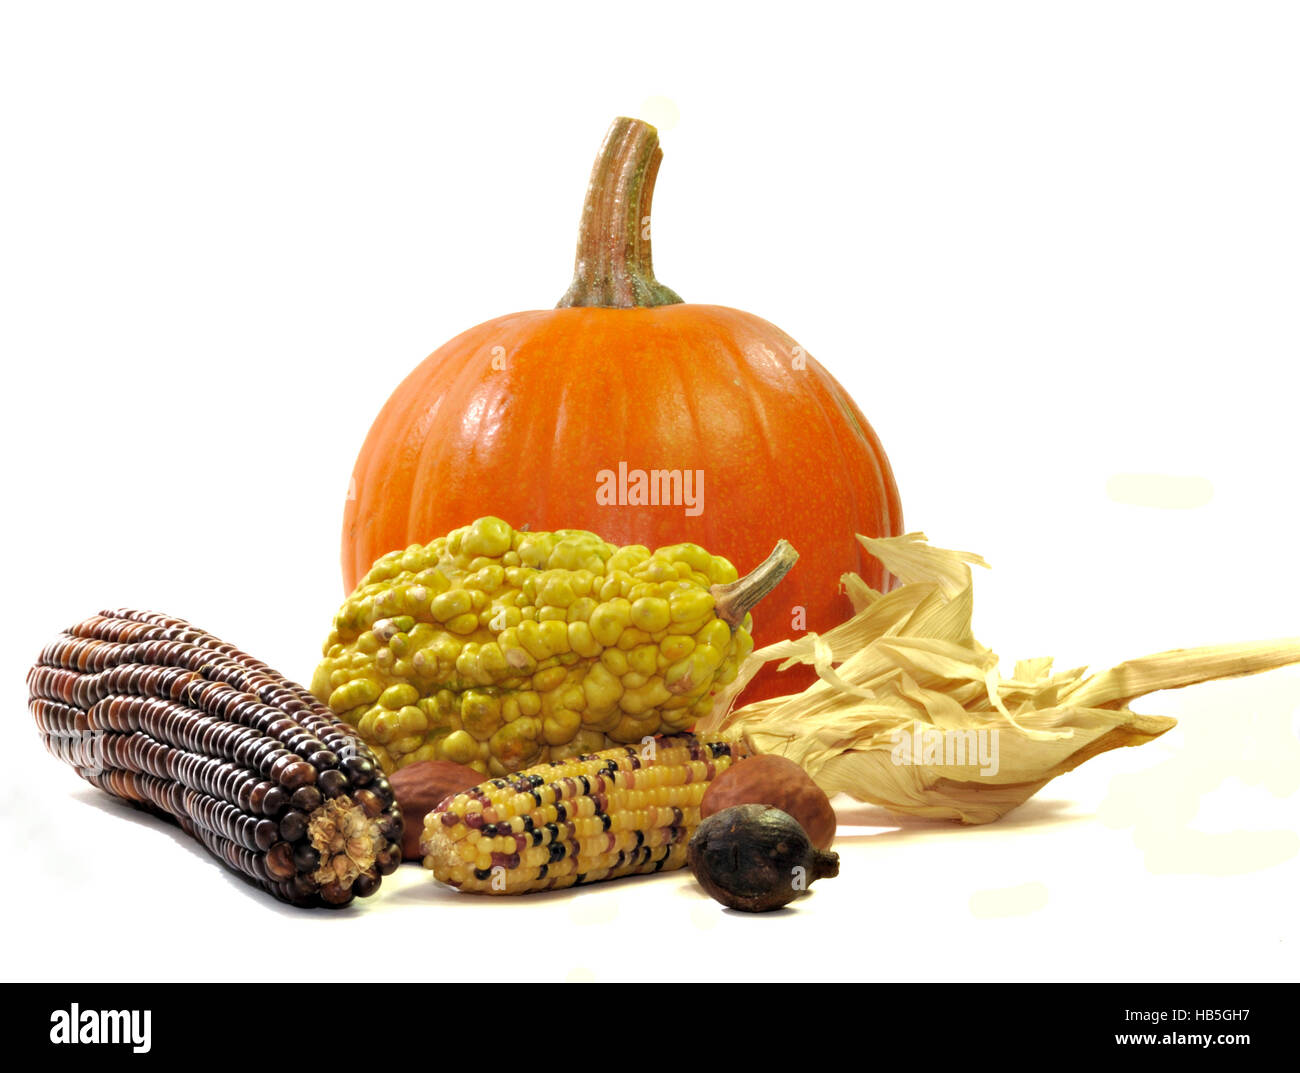 Fall still life of pumpkin, maize, gourds, and nuts isolated on white. Stock Photo